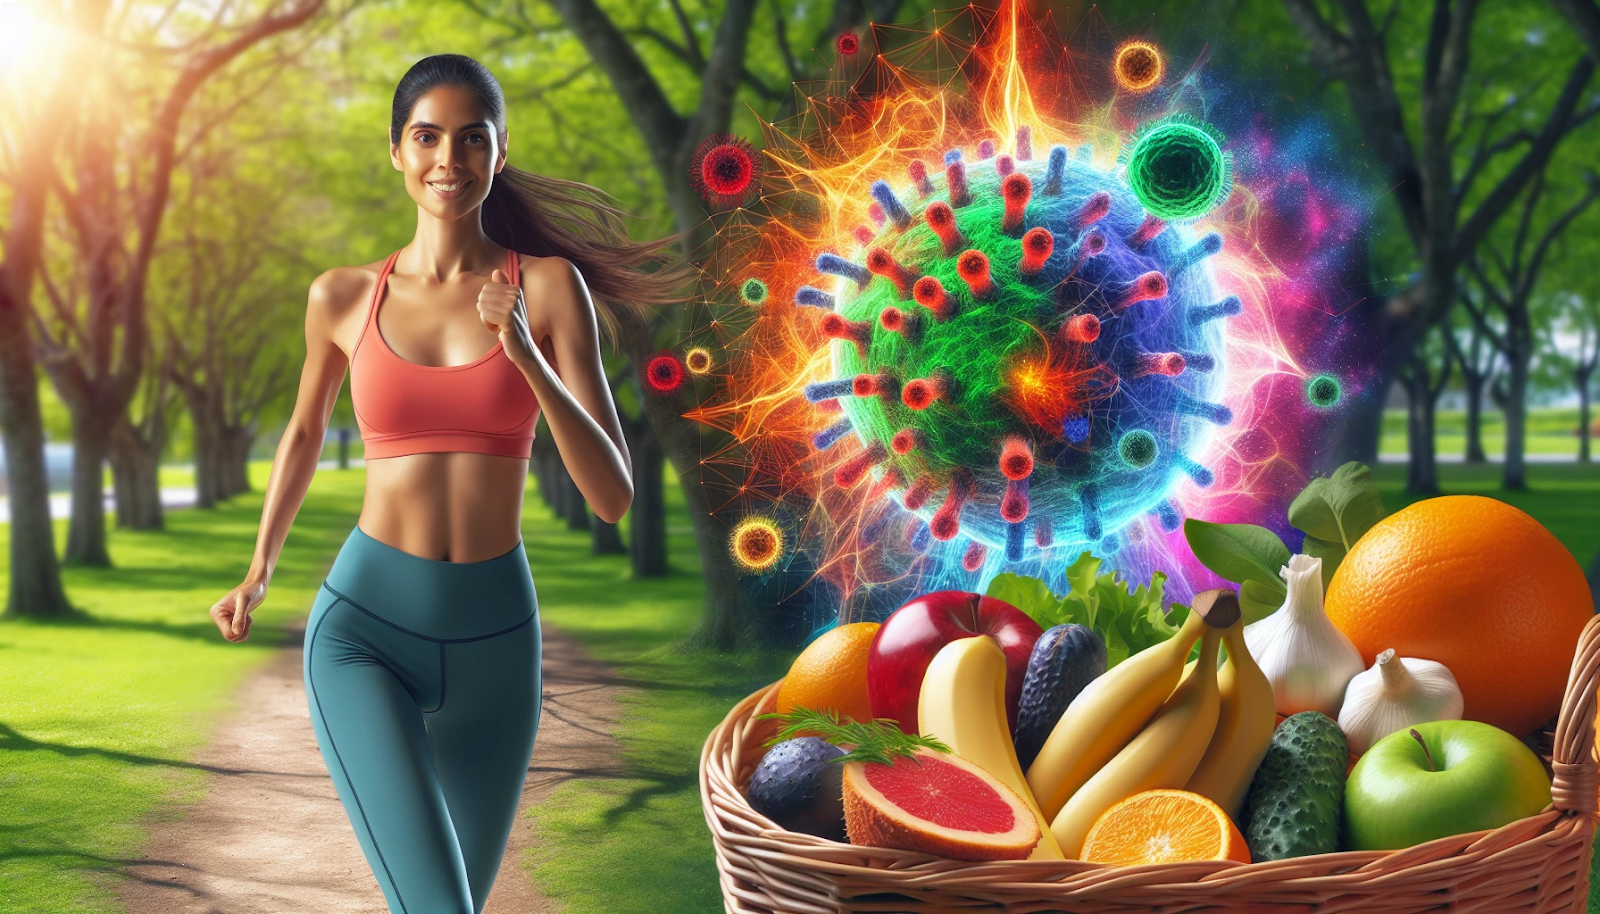 Illustration of healthy diet and exercise